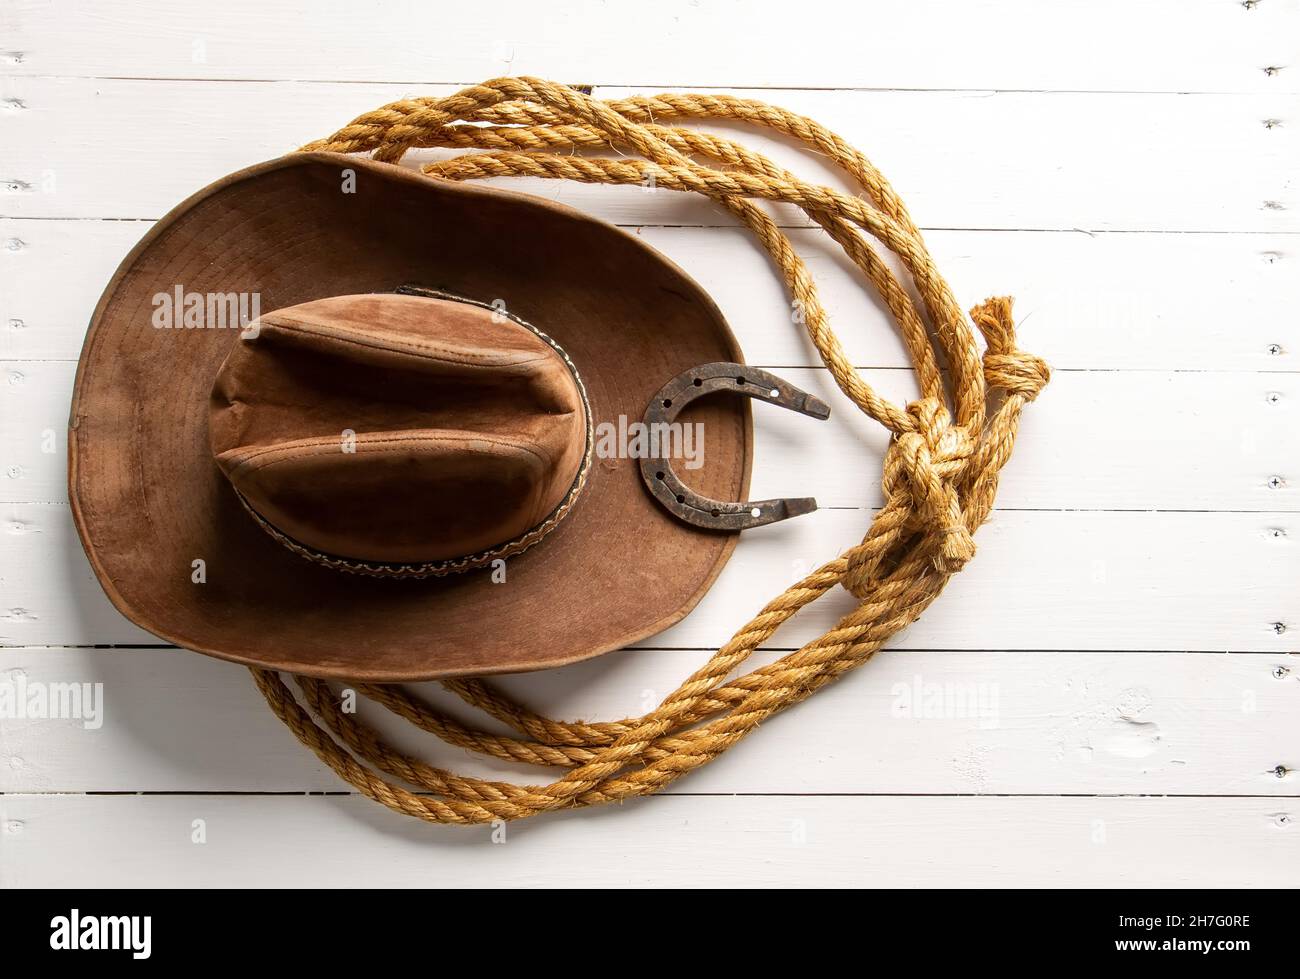 Classic brown cowboy hat lasso and horseshoe wild west still life on rough white wooden table Stock Photo